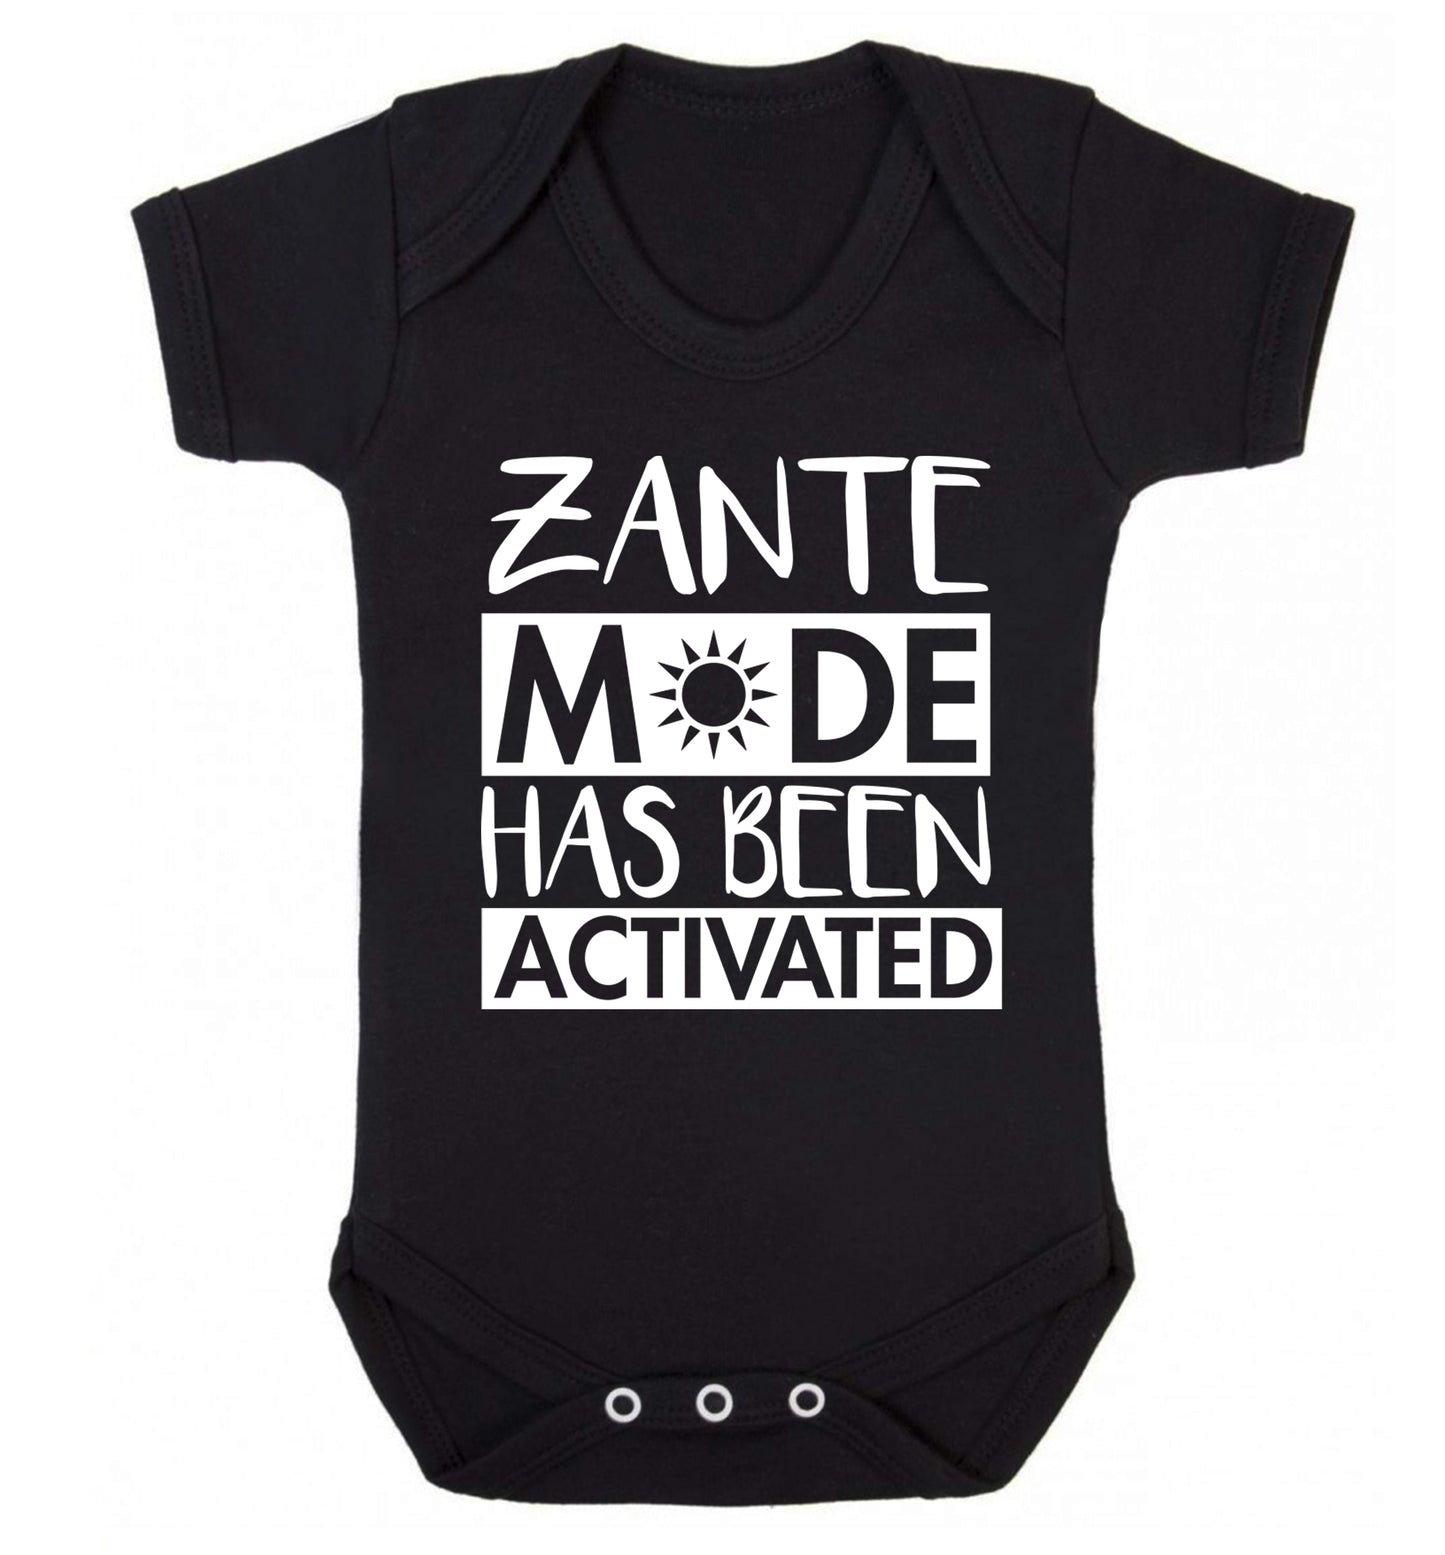 Zante mode has been activated Baby Vest black 18-24 months